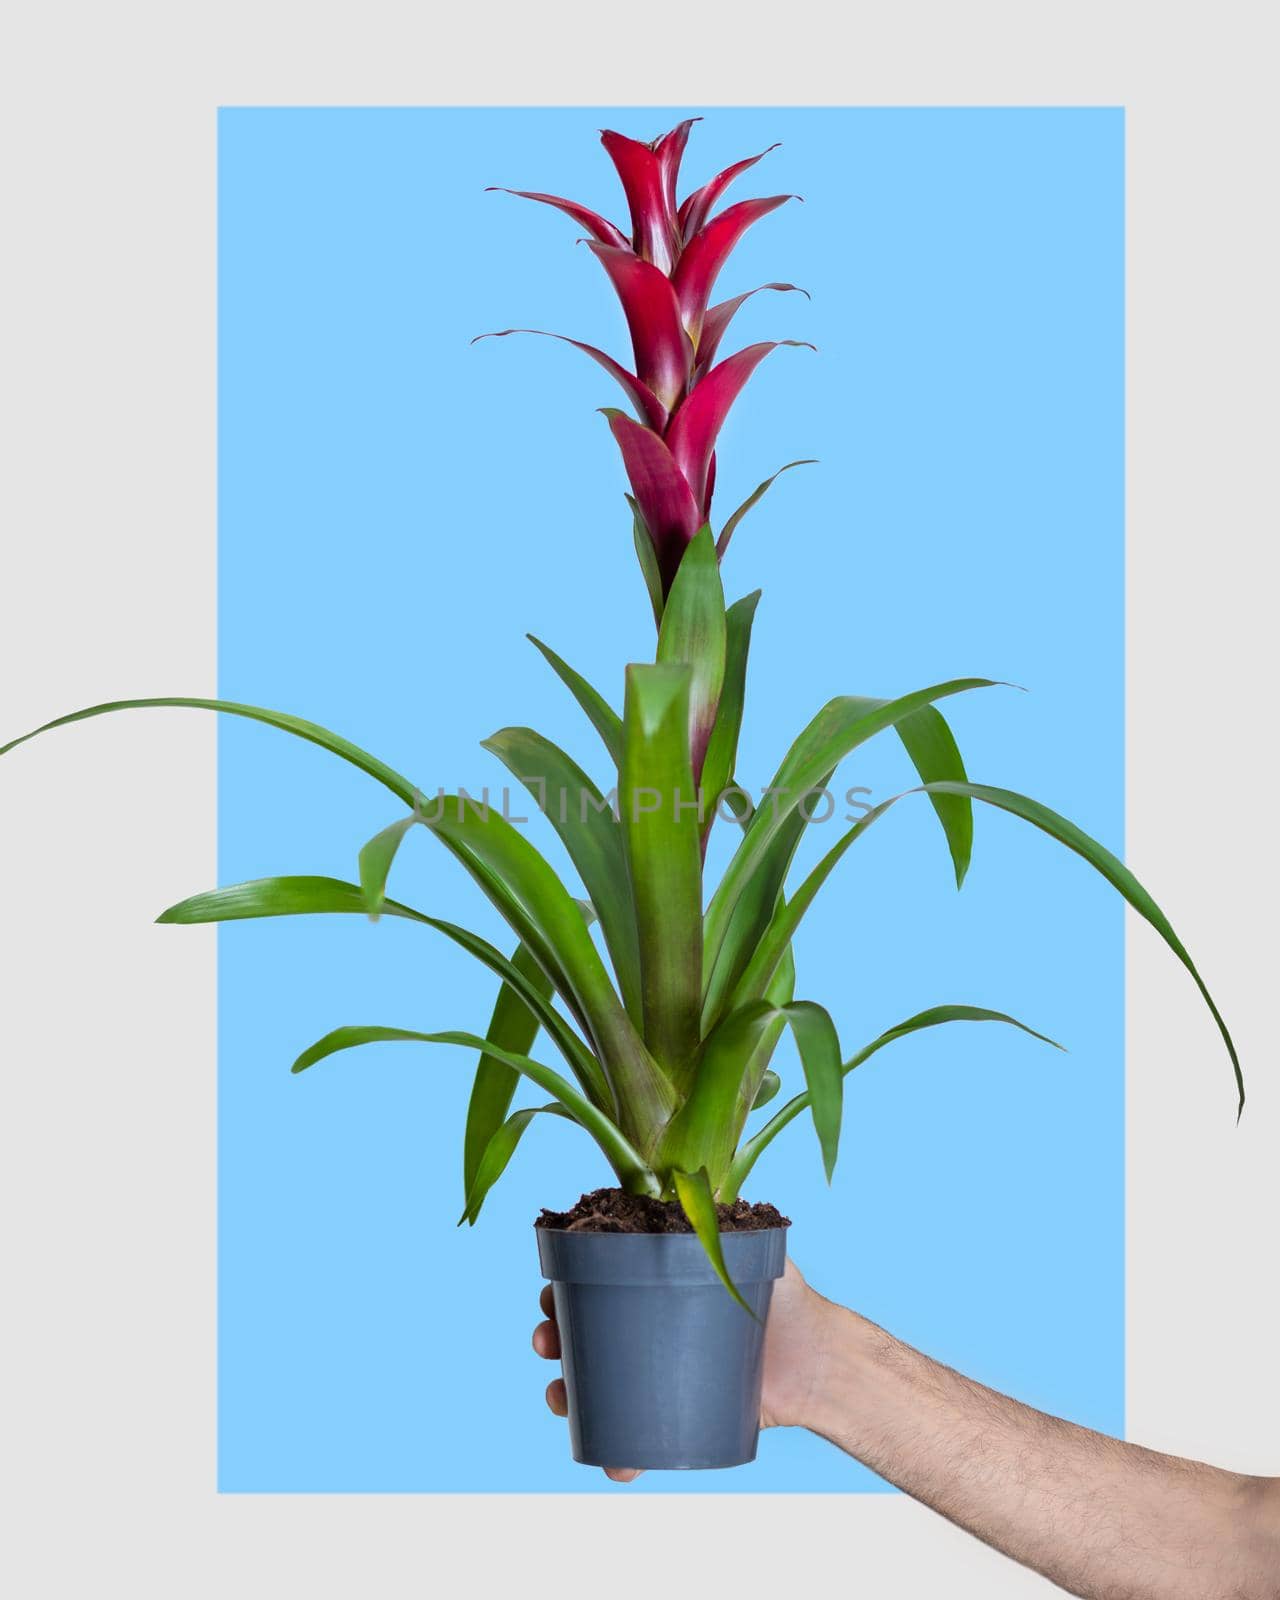 Holding Red Bromeliaceae, monocot flowering plant in blue background